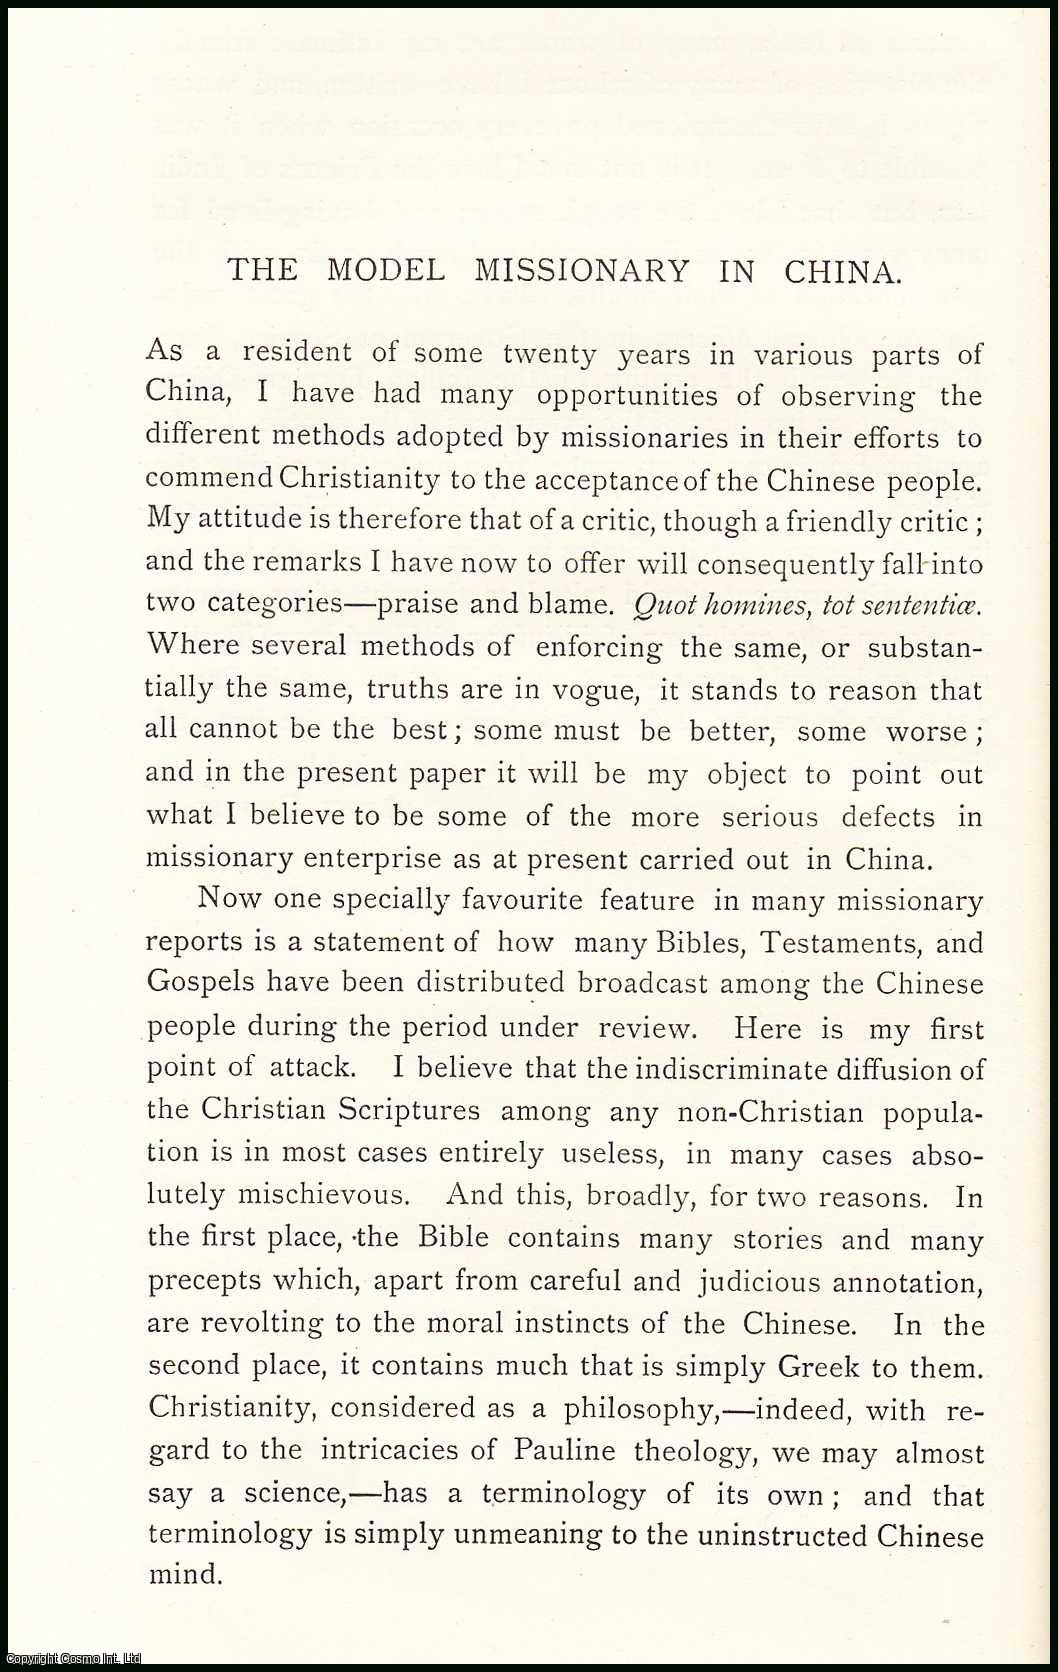 Frederic H. Balfour - The Model Missionary in China : commend Christianity to the acceptance of the Chinese people. An uncommon original article from The Asiatic Quarterly Review, 1890.